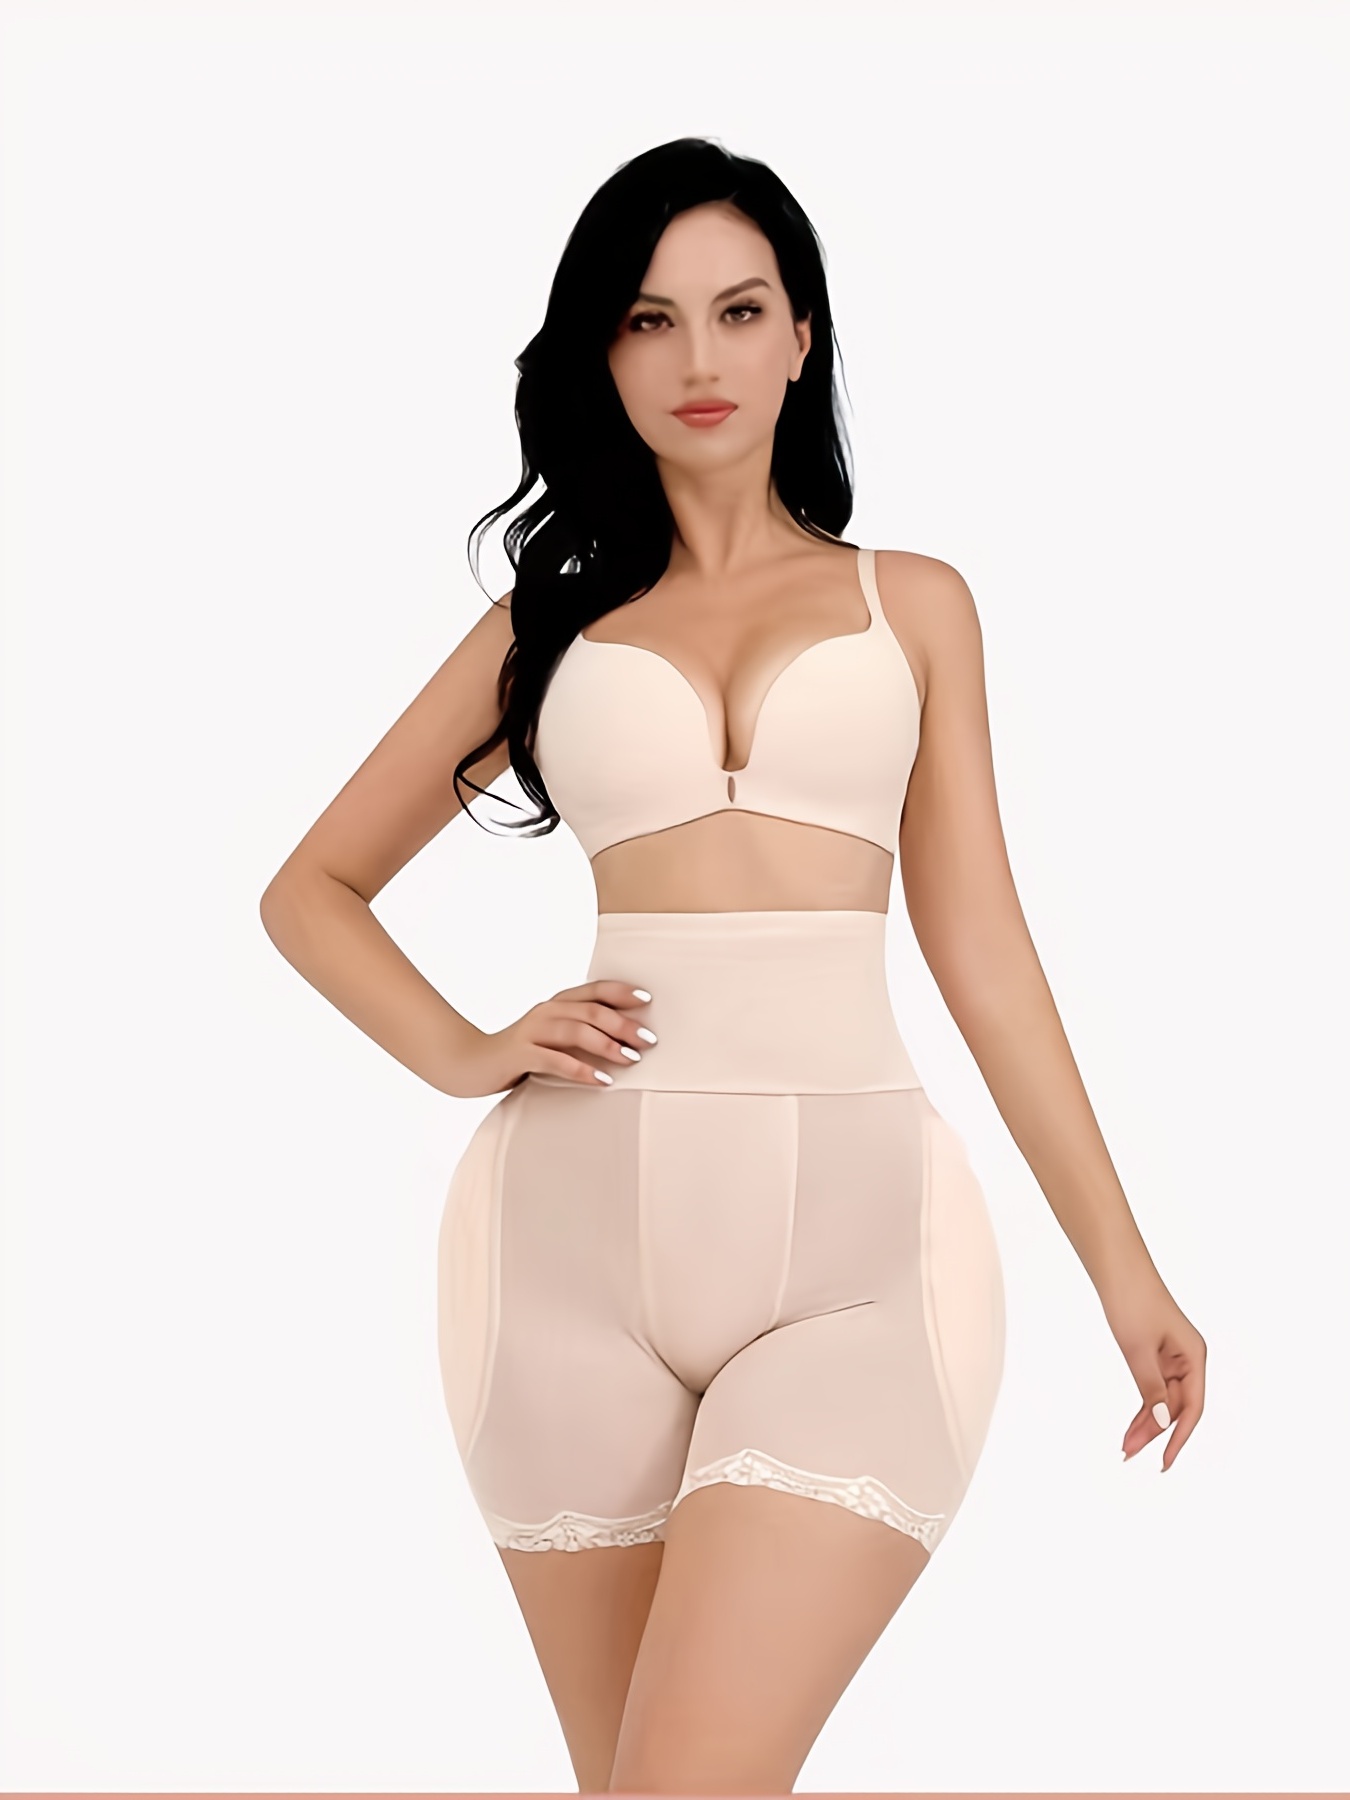 SMALLER WAIST BIGGER HIPS, SHAPEWEAR ft H&M AND ROCESVIP